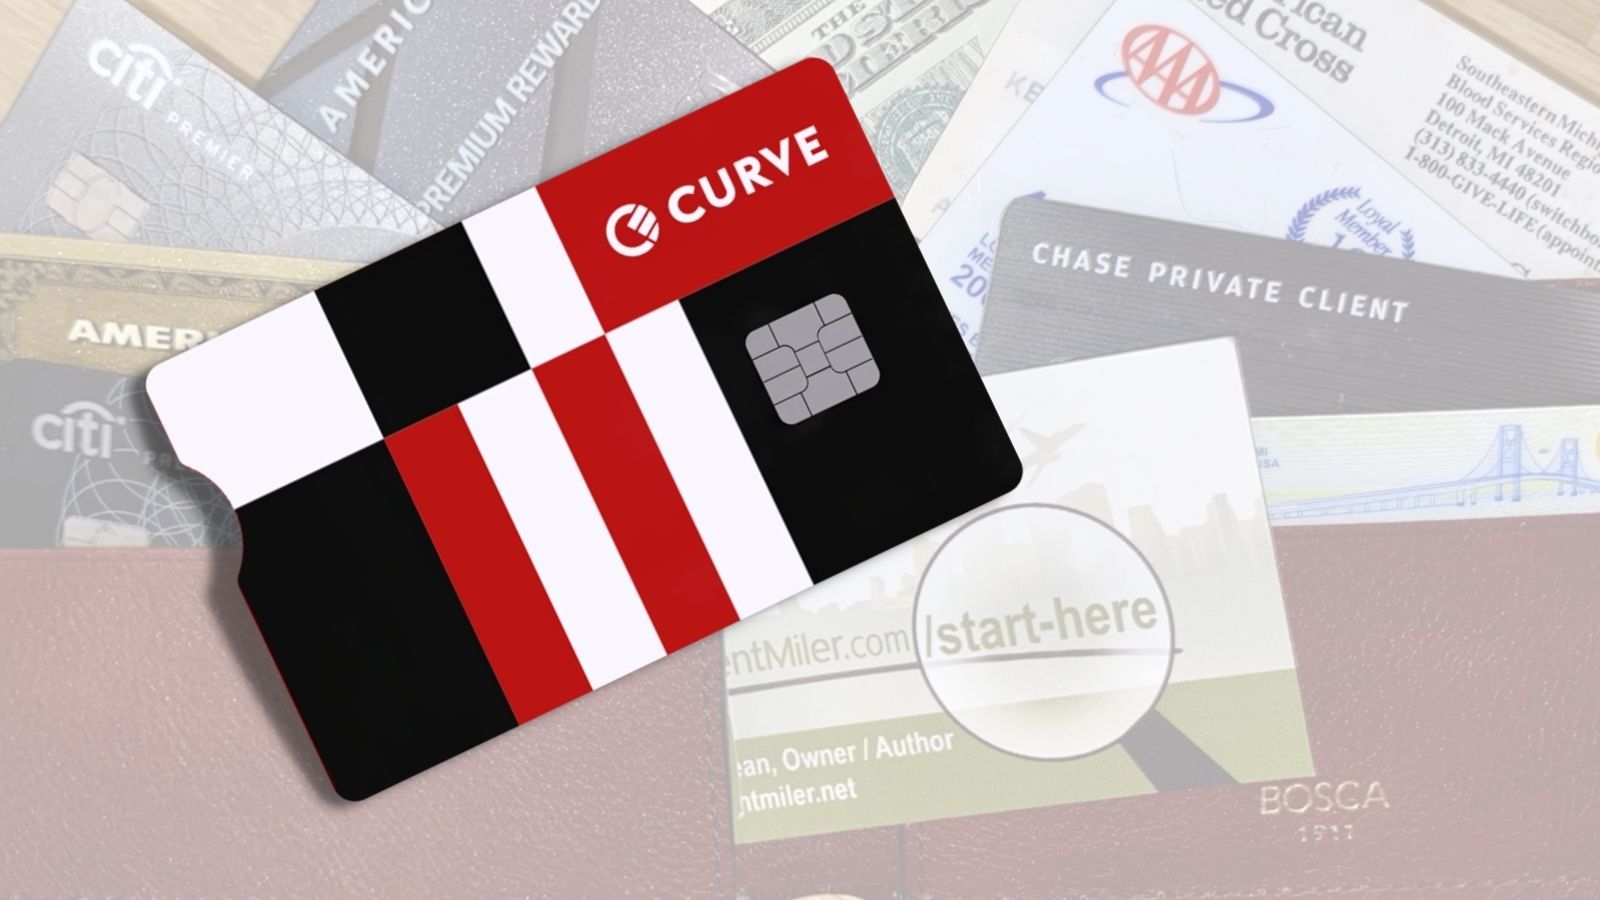 Curve card review: Awesome, but limited (Update: Smart Rules working)